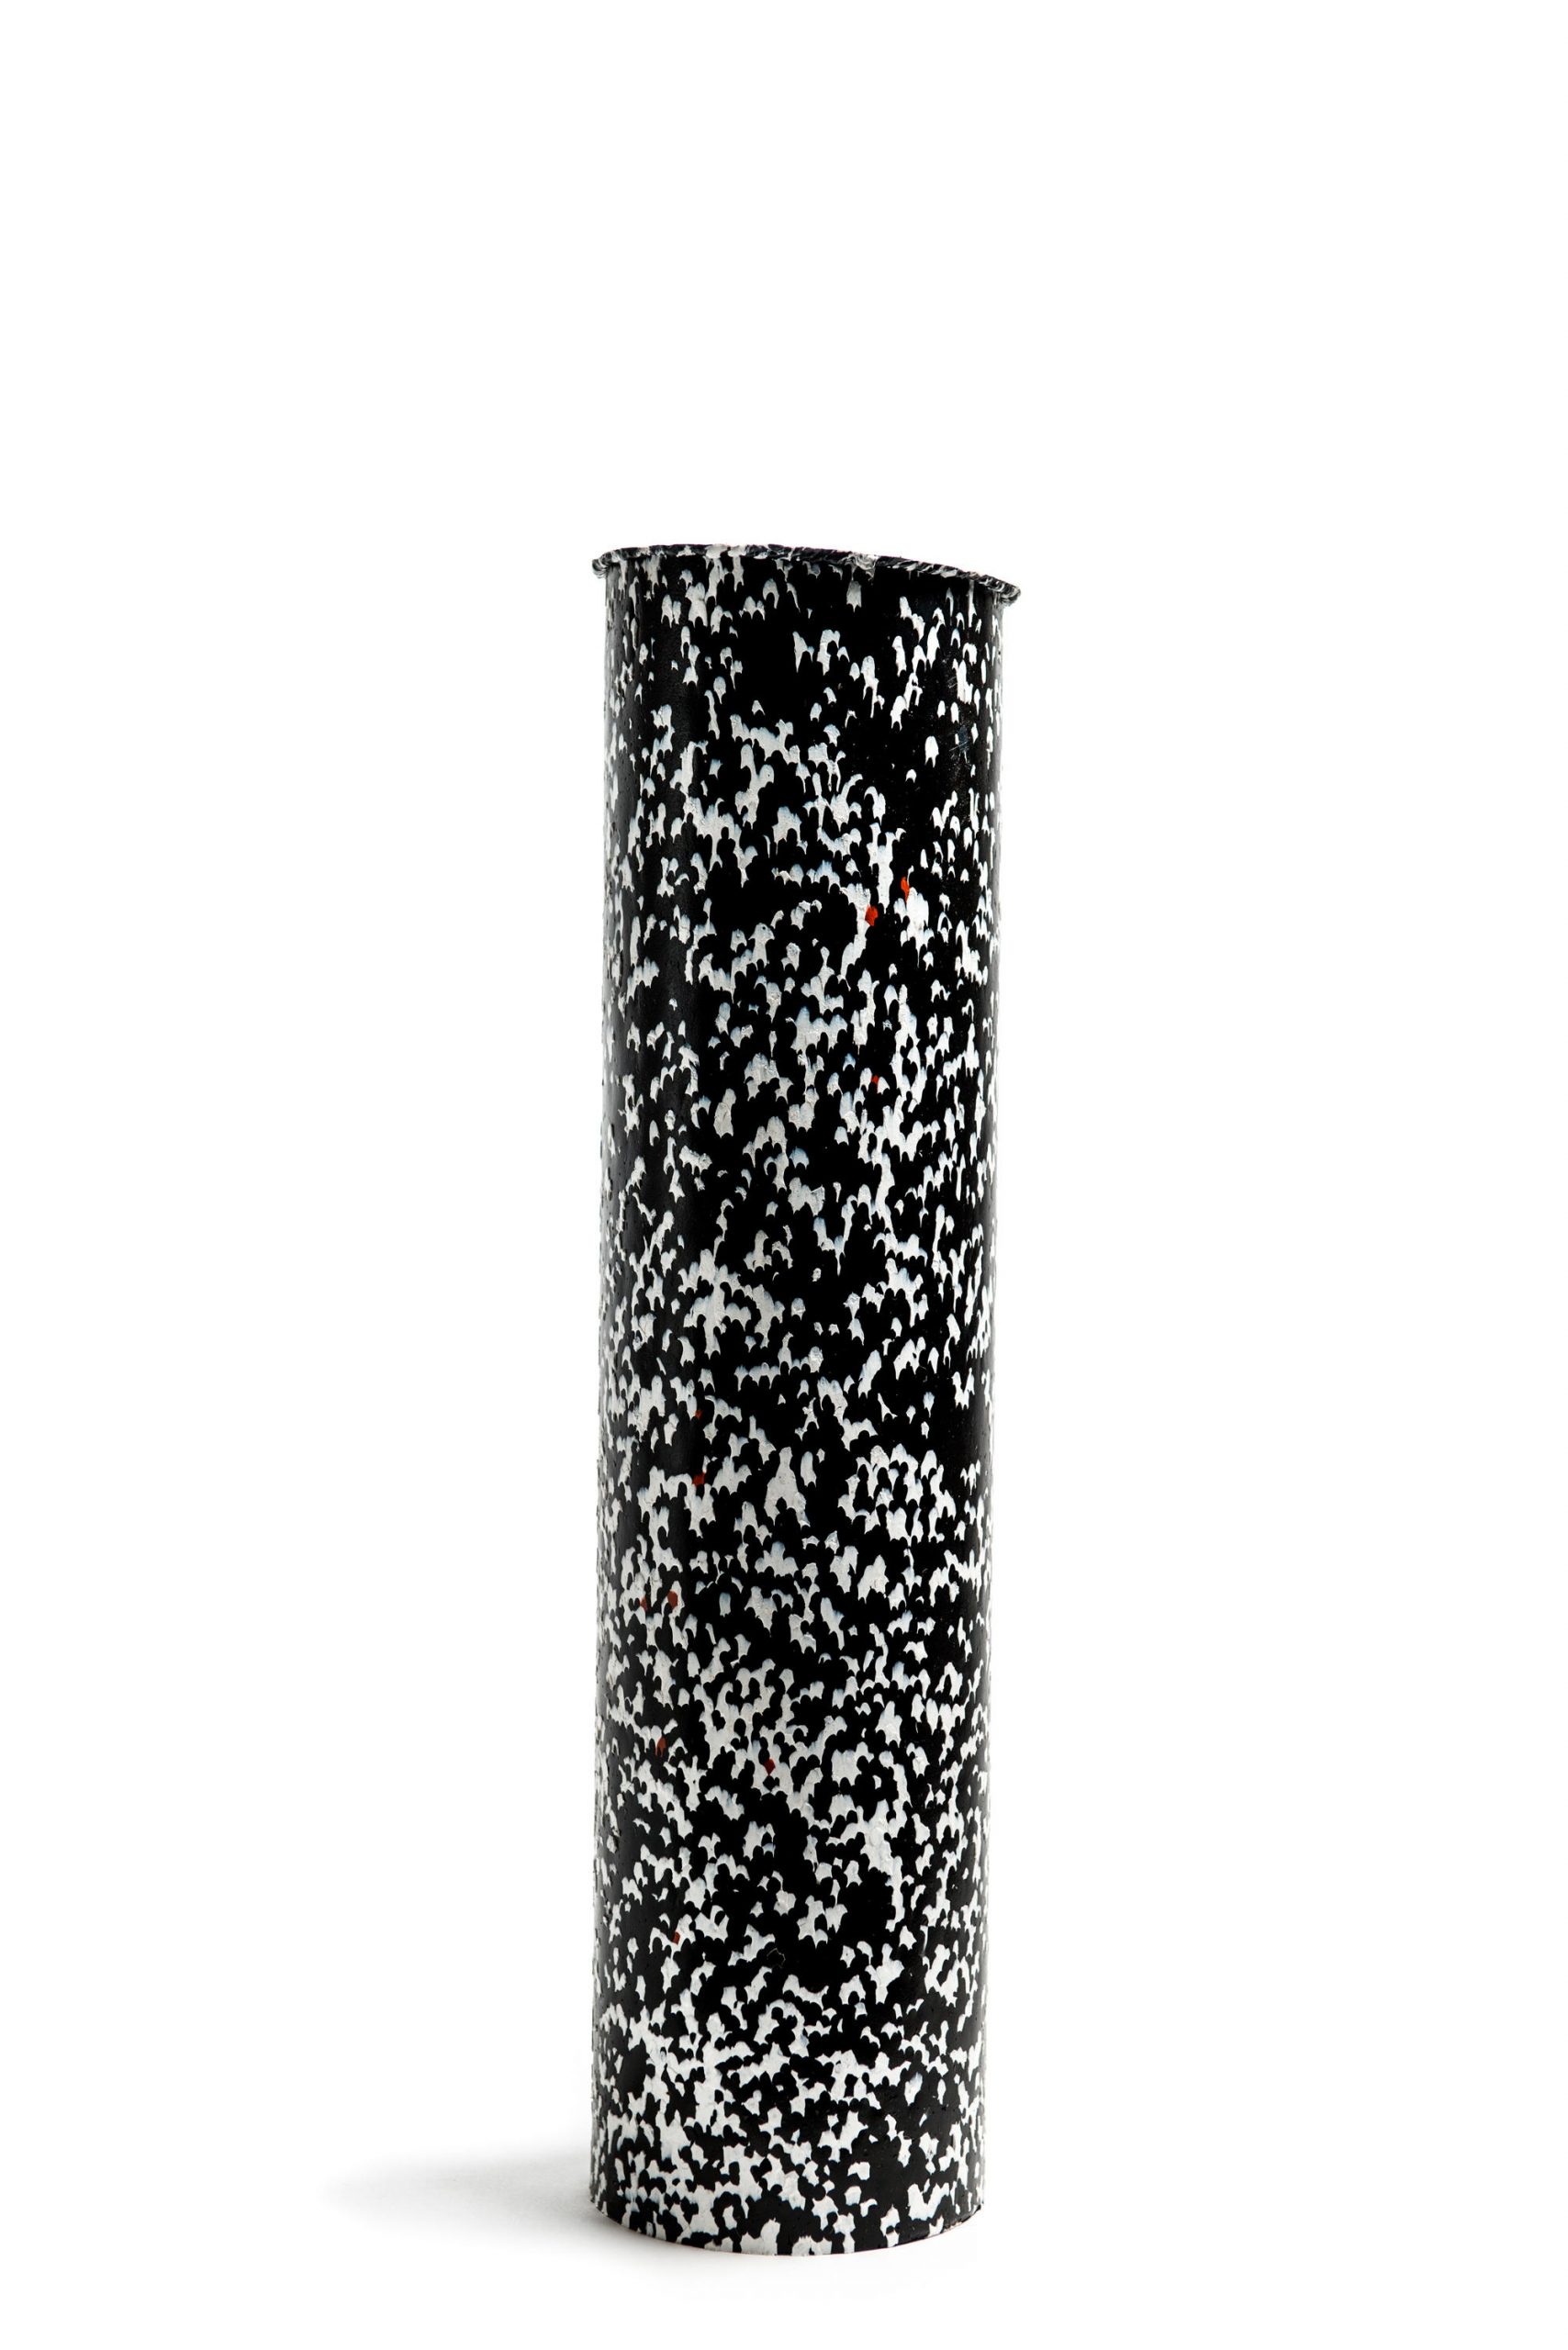 Tube Vase No 1 Mobilier Design Architonic throughout size 2002 X 3000